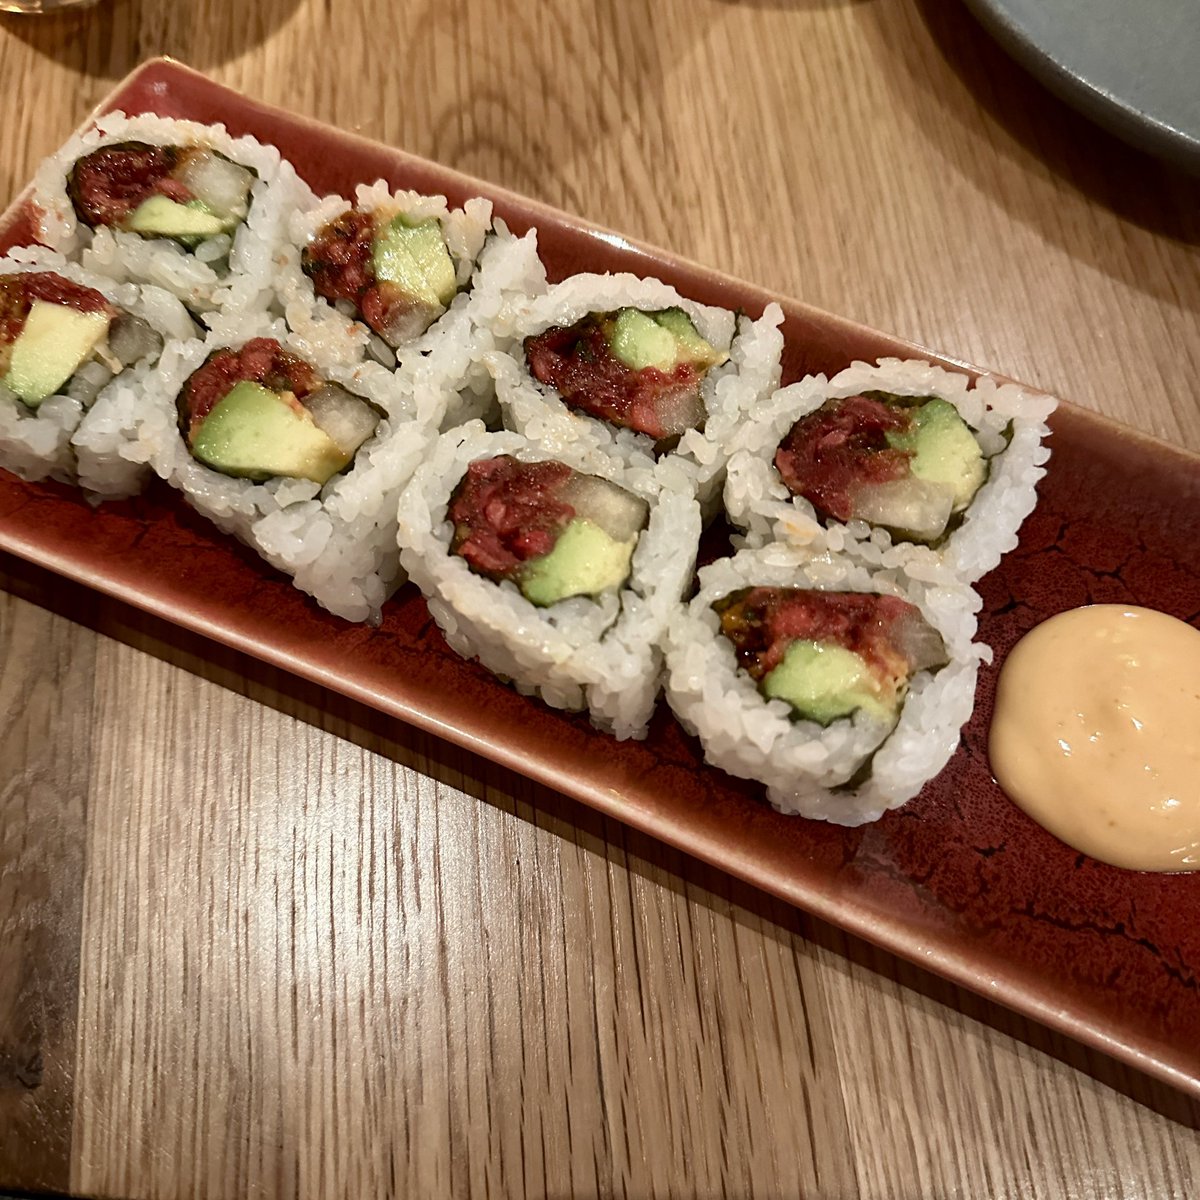 Would you believe me… if I told you… this “Spicy Tuna” roll is #Vegetarian? Ahi Watermelon, Avocado, Toasted Coconut 🥥 at @PlantaQueen #FortLauderdale 🏝️